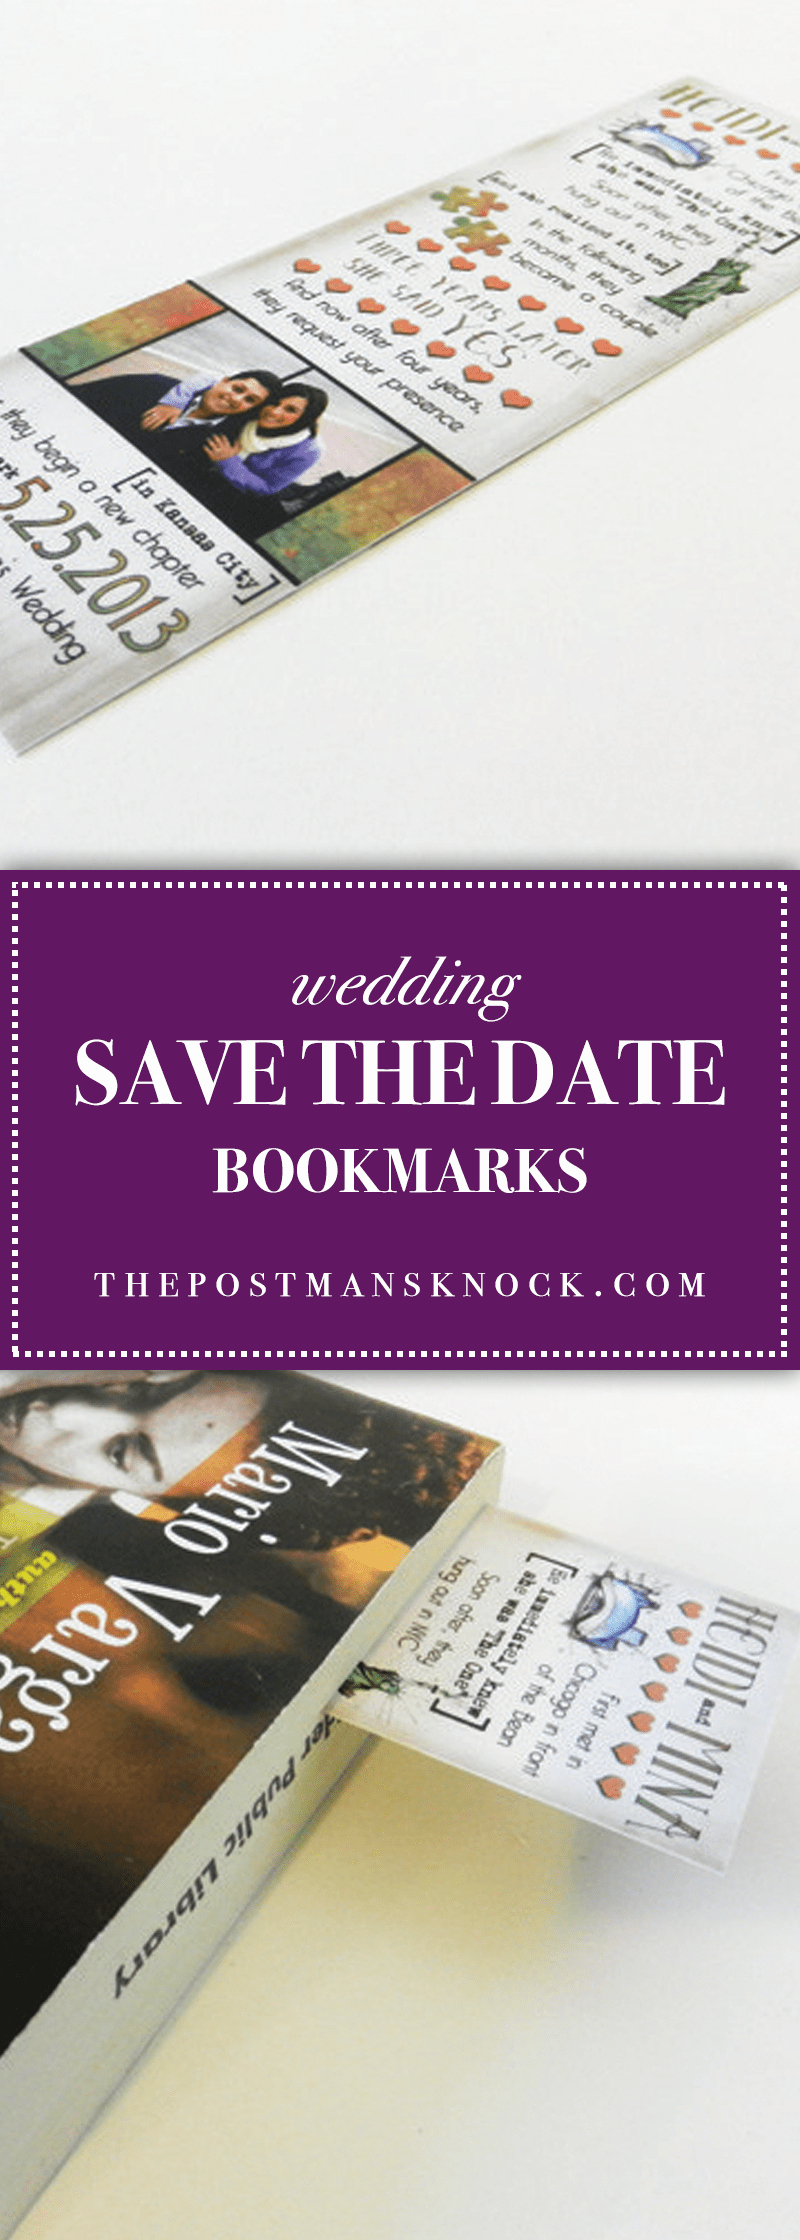 Save the Date Bookmarks New Wedding Save the Date Bookmarks